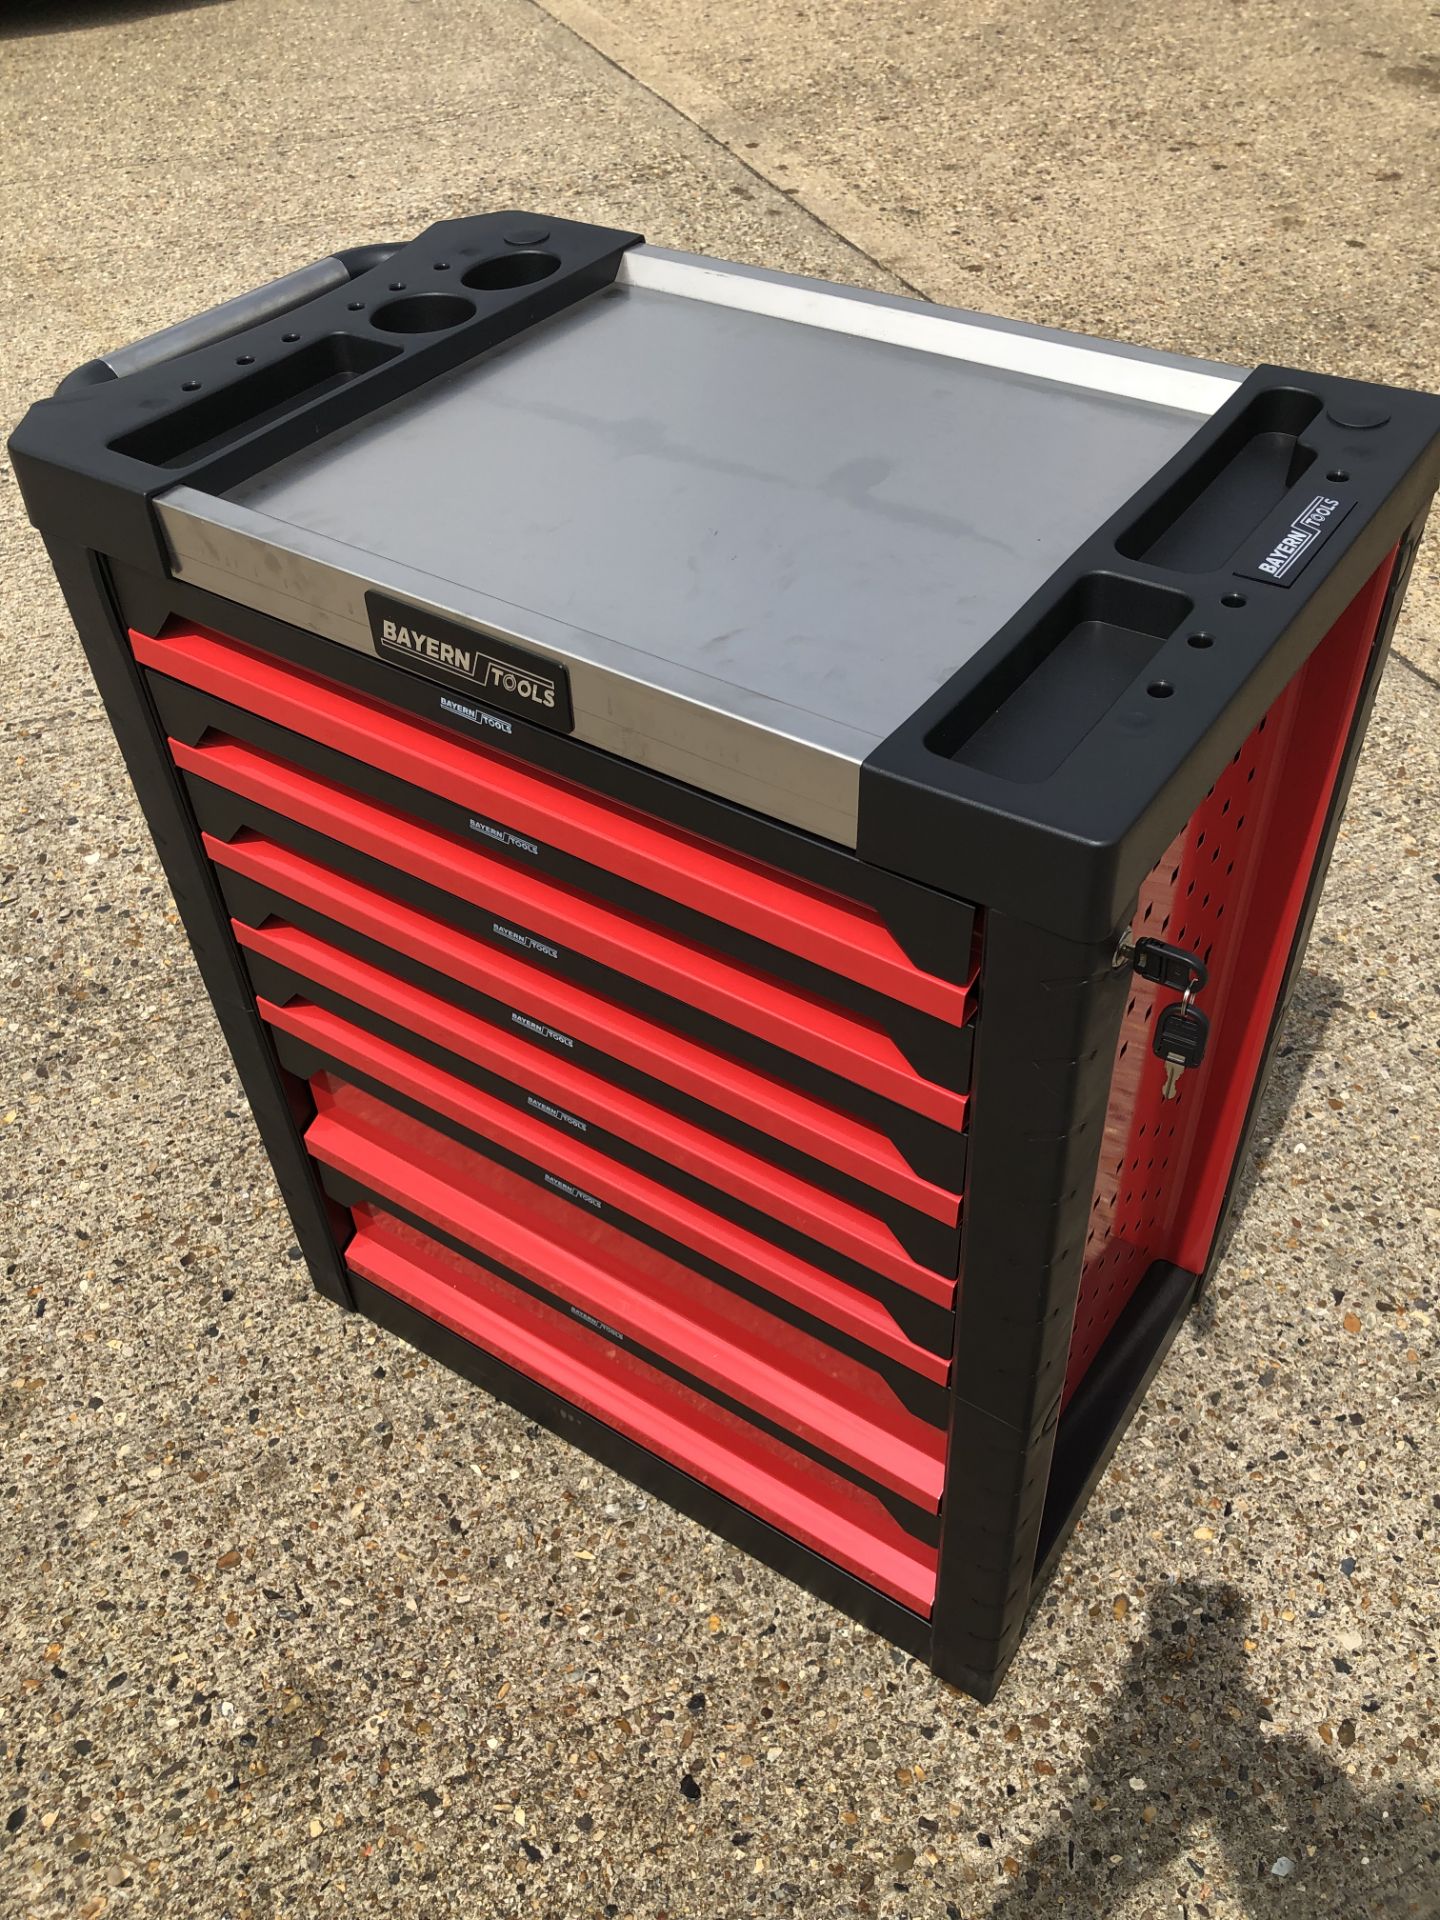 V Brand New Professional Locking Garage Tool Trolley/Cabinet (Red/Blue) with Metal Top and 7 Drawers - Image 3 of 9